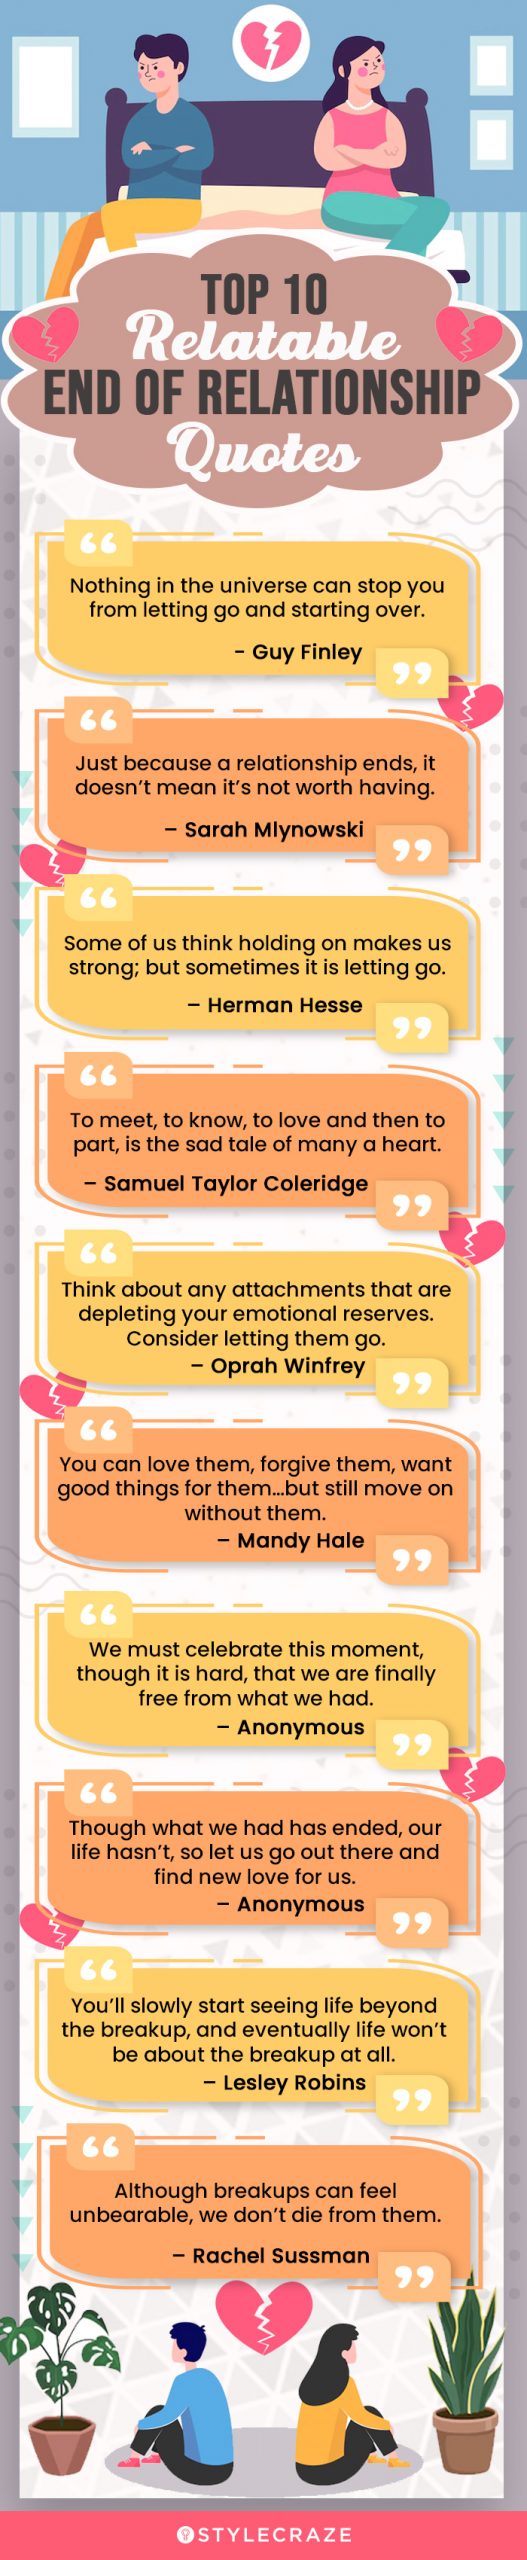 top 10relatable end of relationship quotes (infographic)